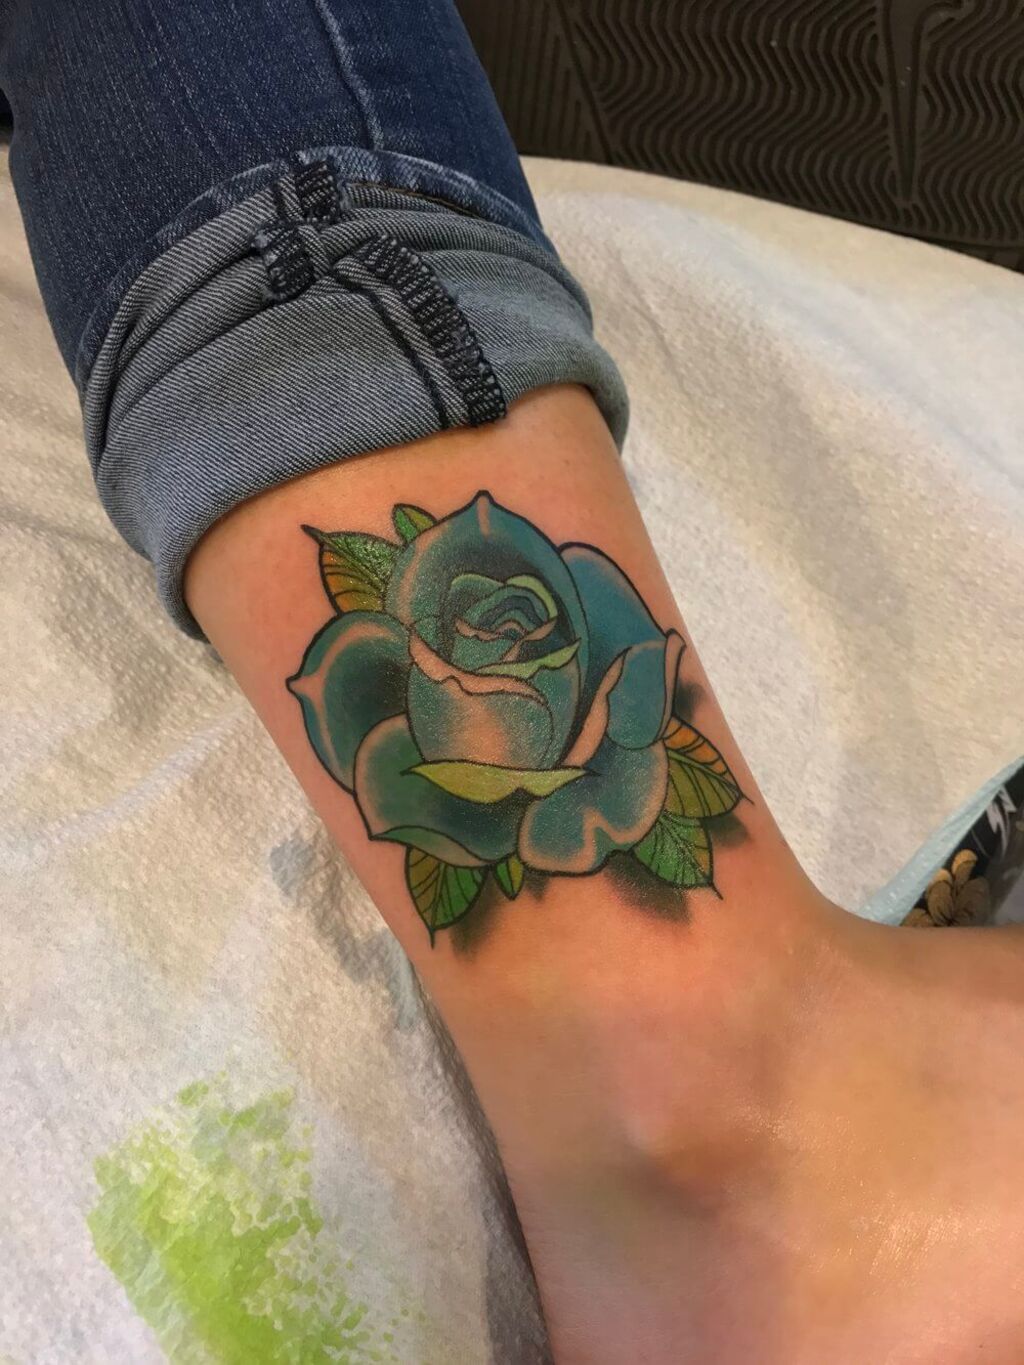 Blue Rose Tattoo For Ankle